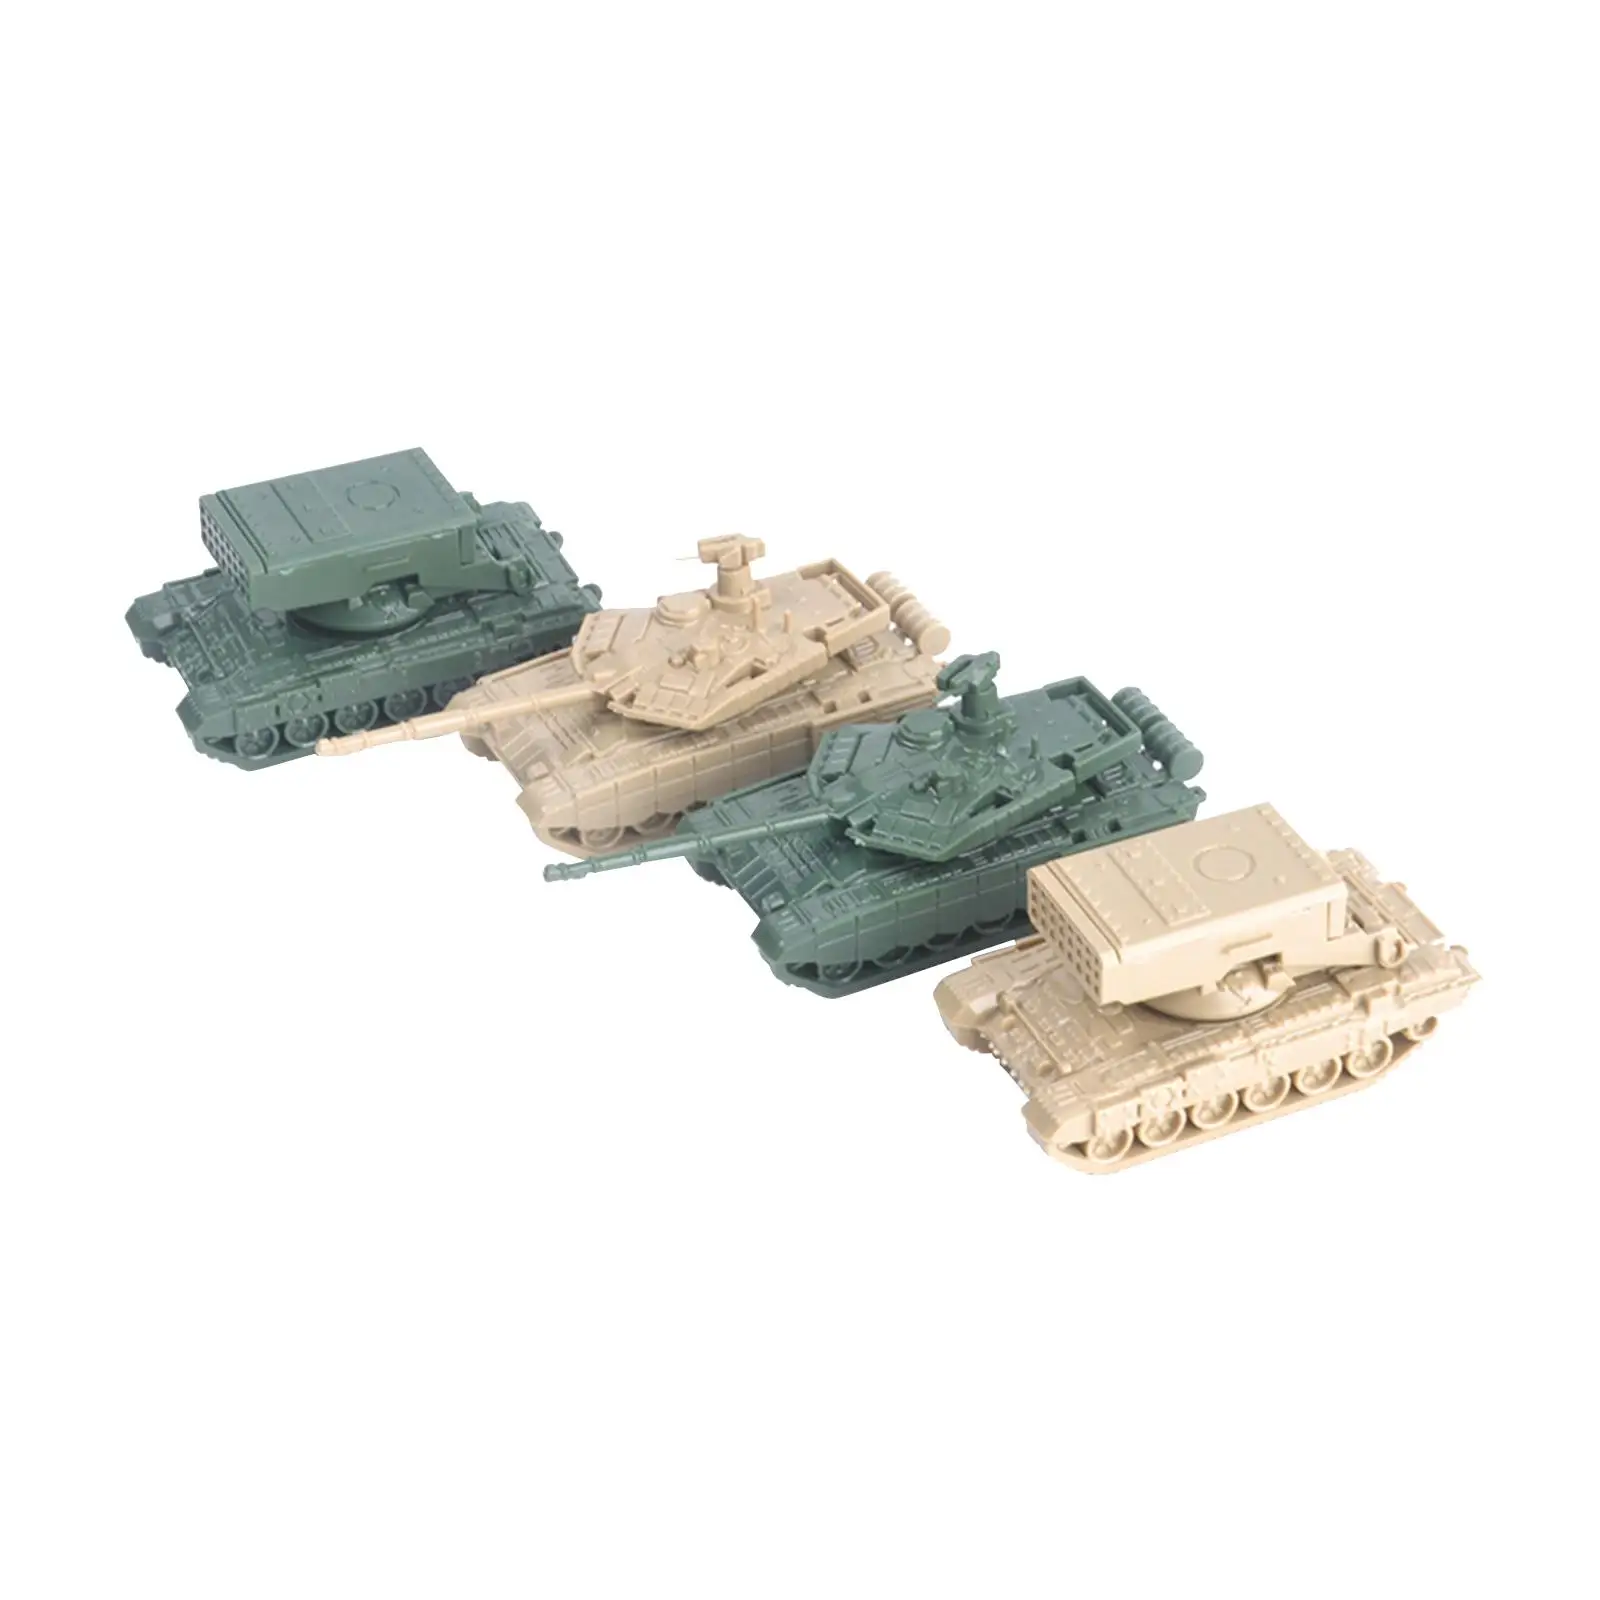 4 Pieces 1:144 Scale DIY Tank Model Miniature Tank Model Building Kits Tank Truck 4D Model for Toddlers Boys Kids Birthday Gifts